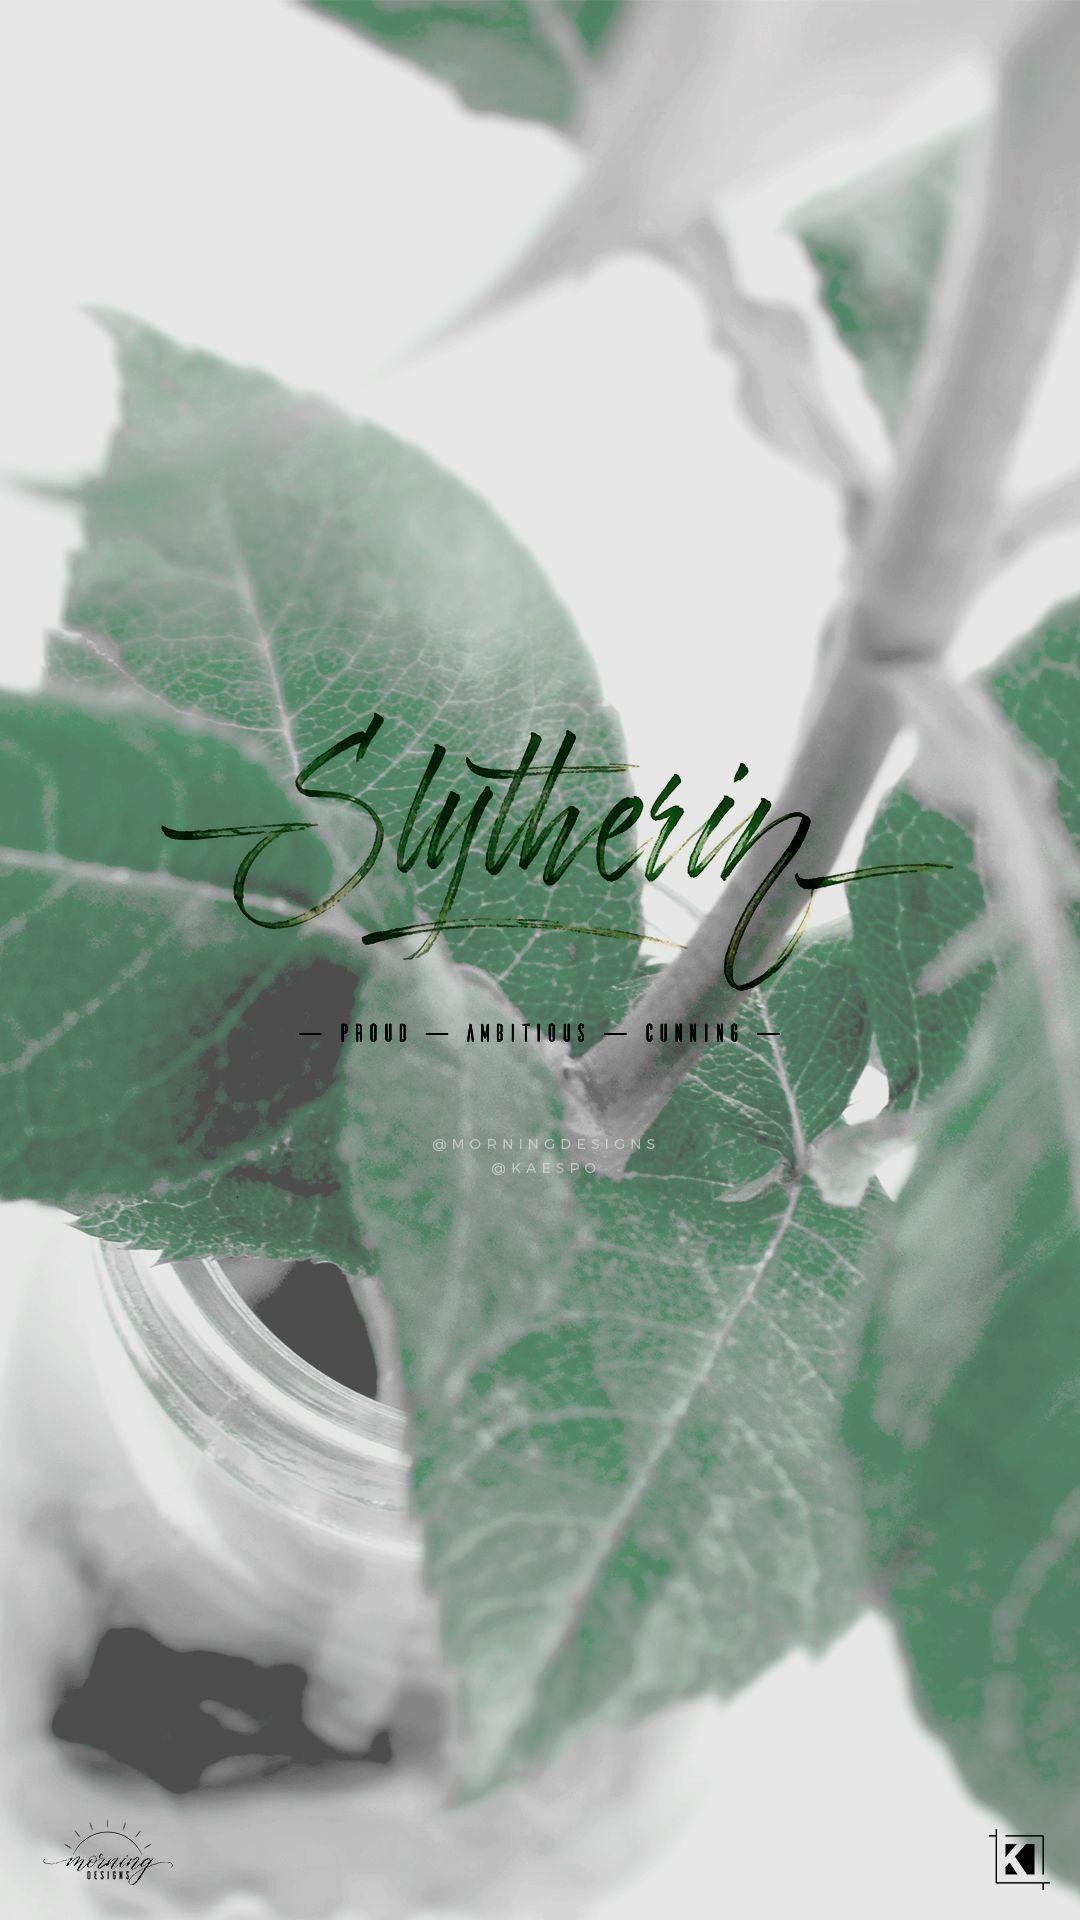 Floral Slytherin Aesthetics Phone Wallpaper Backgrounds